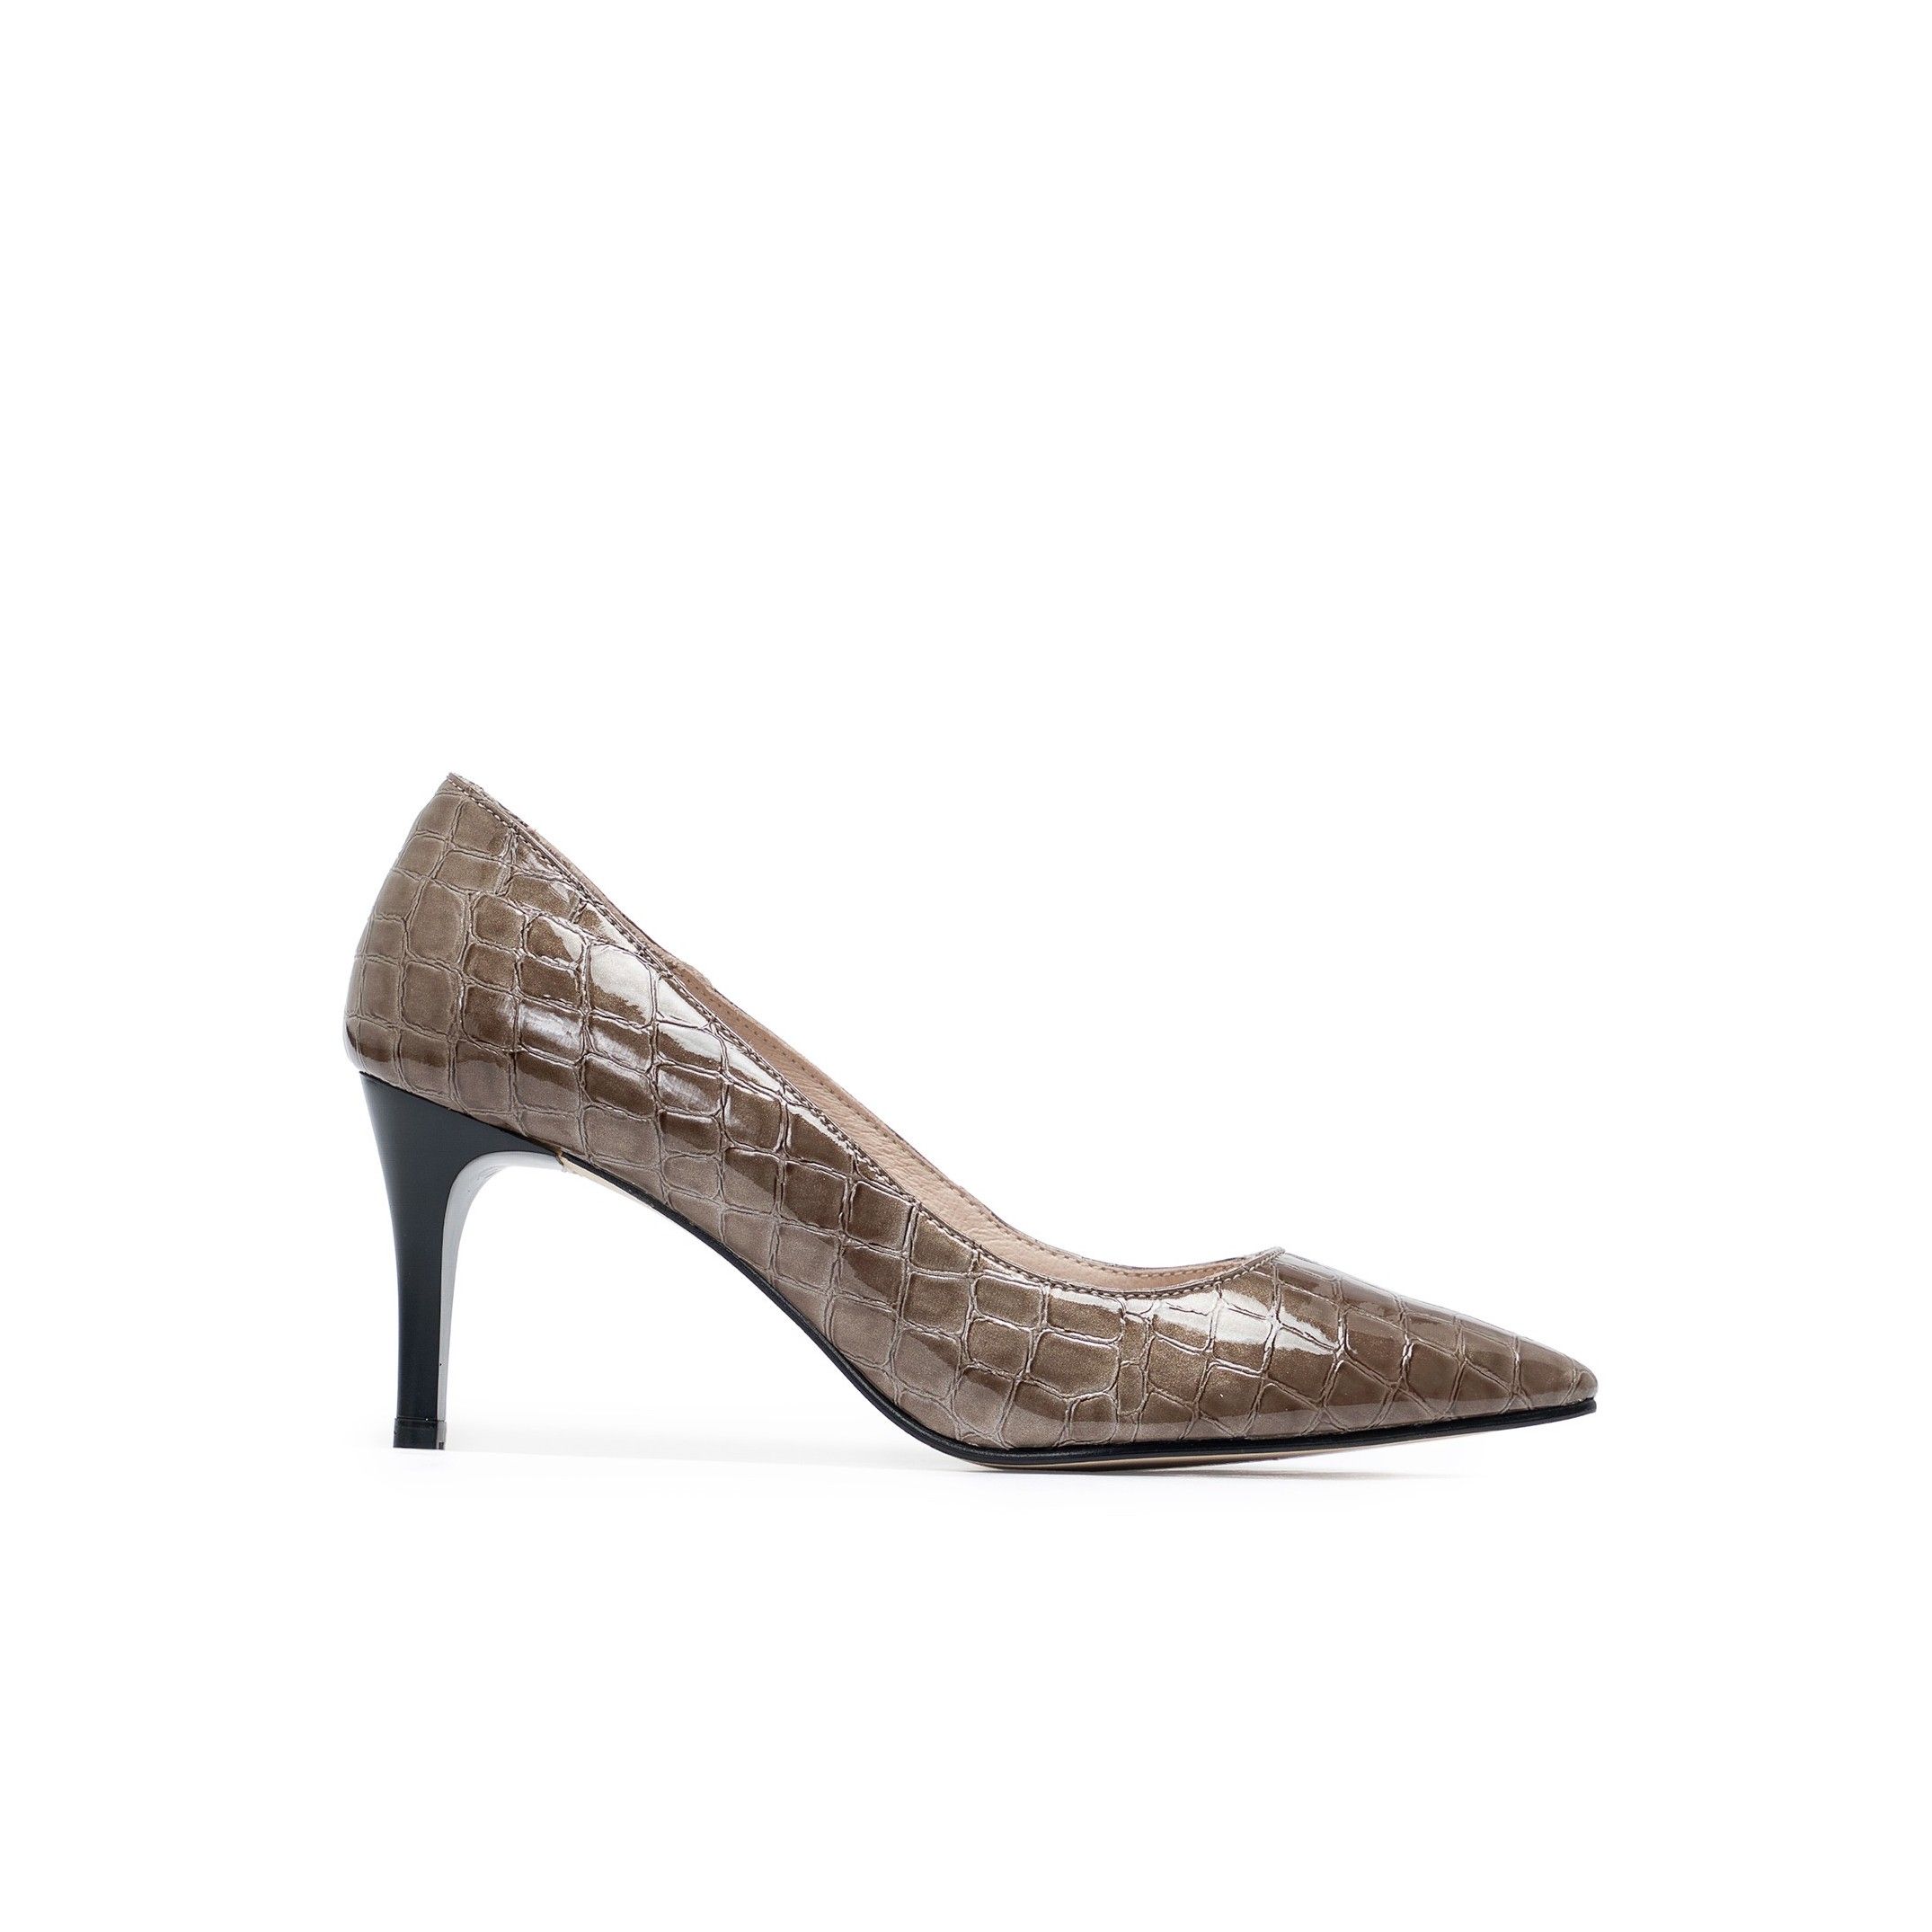 Closed-toe pumps for women, by Son Castellanisimos. Upper made of leatherette. Inner lining and insole made of pig leather. Sole material: synthetic. Heel height: 7 cm. Designed and made in Spain.